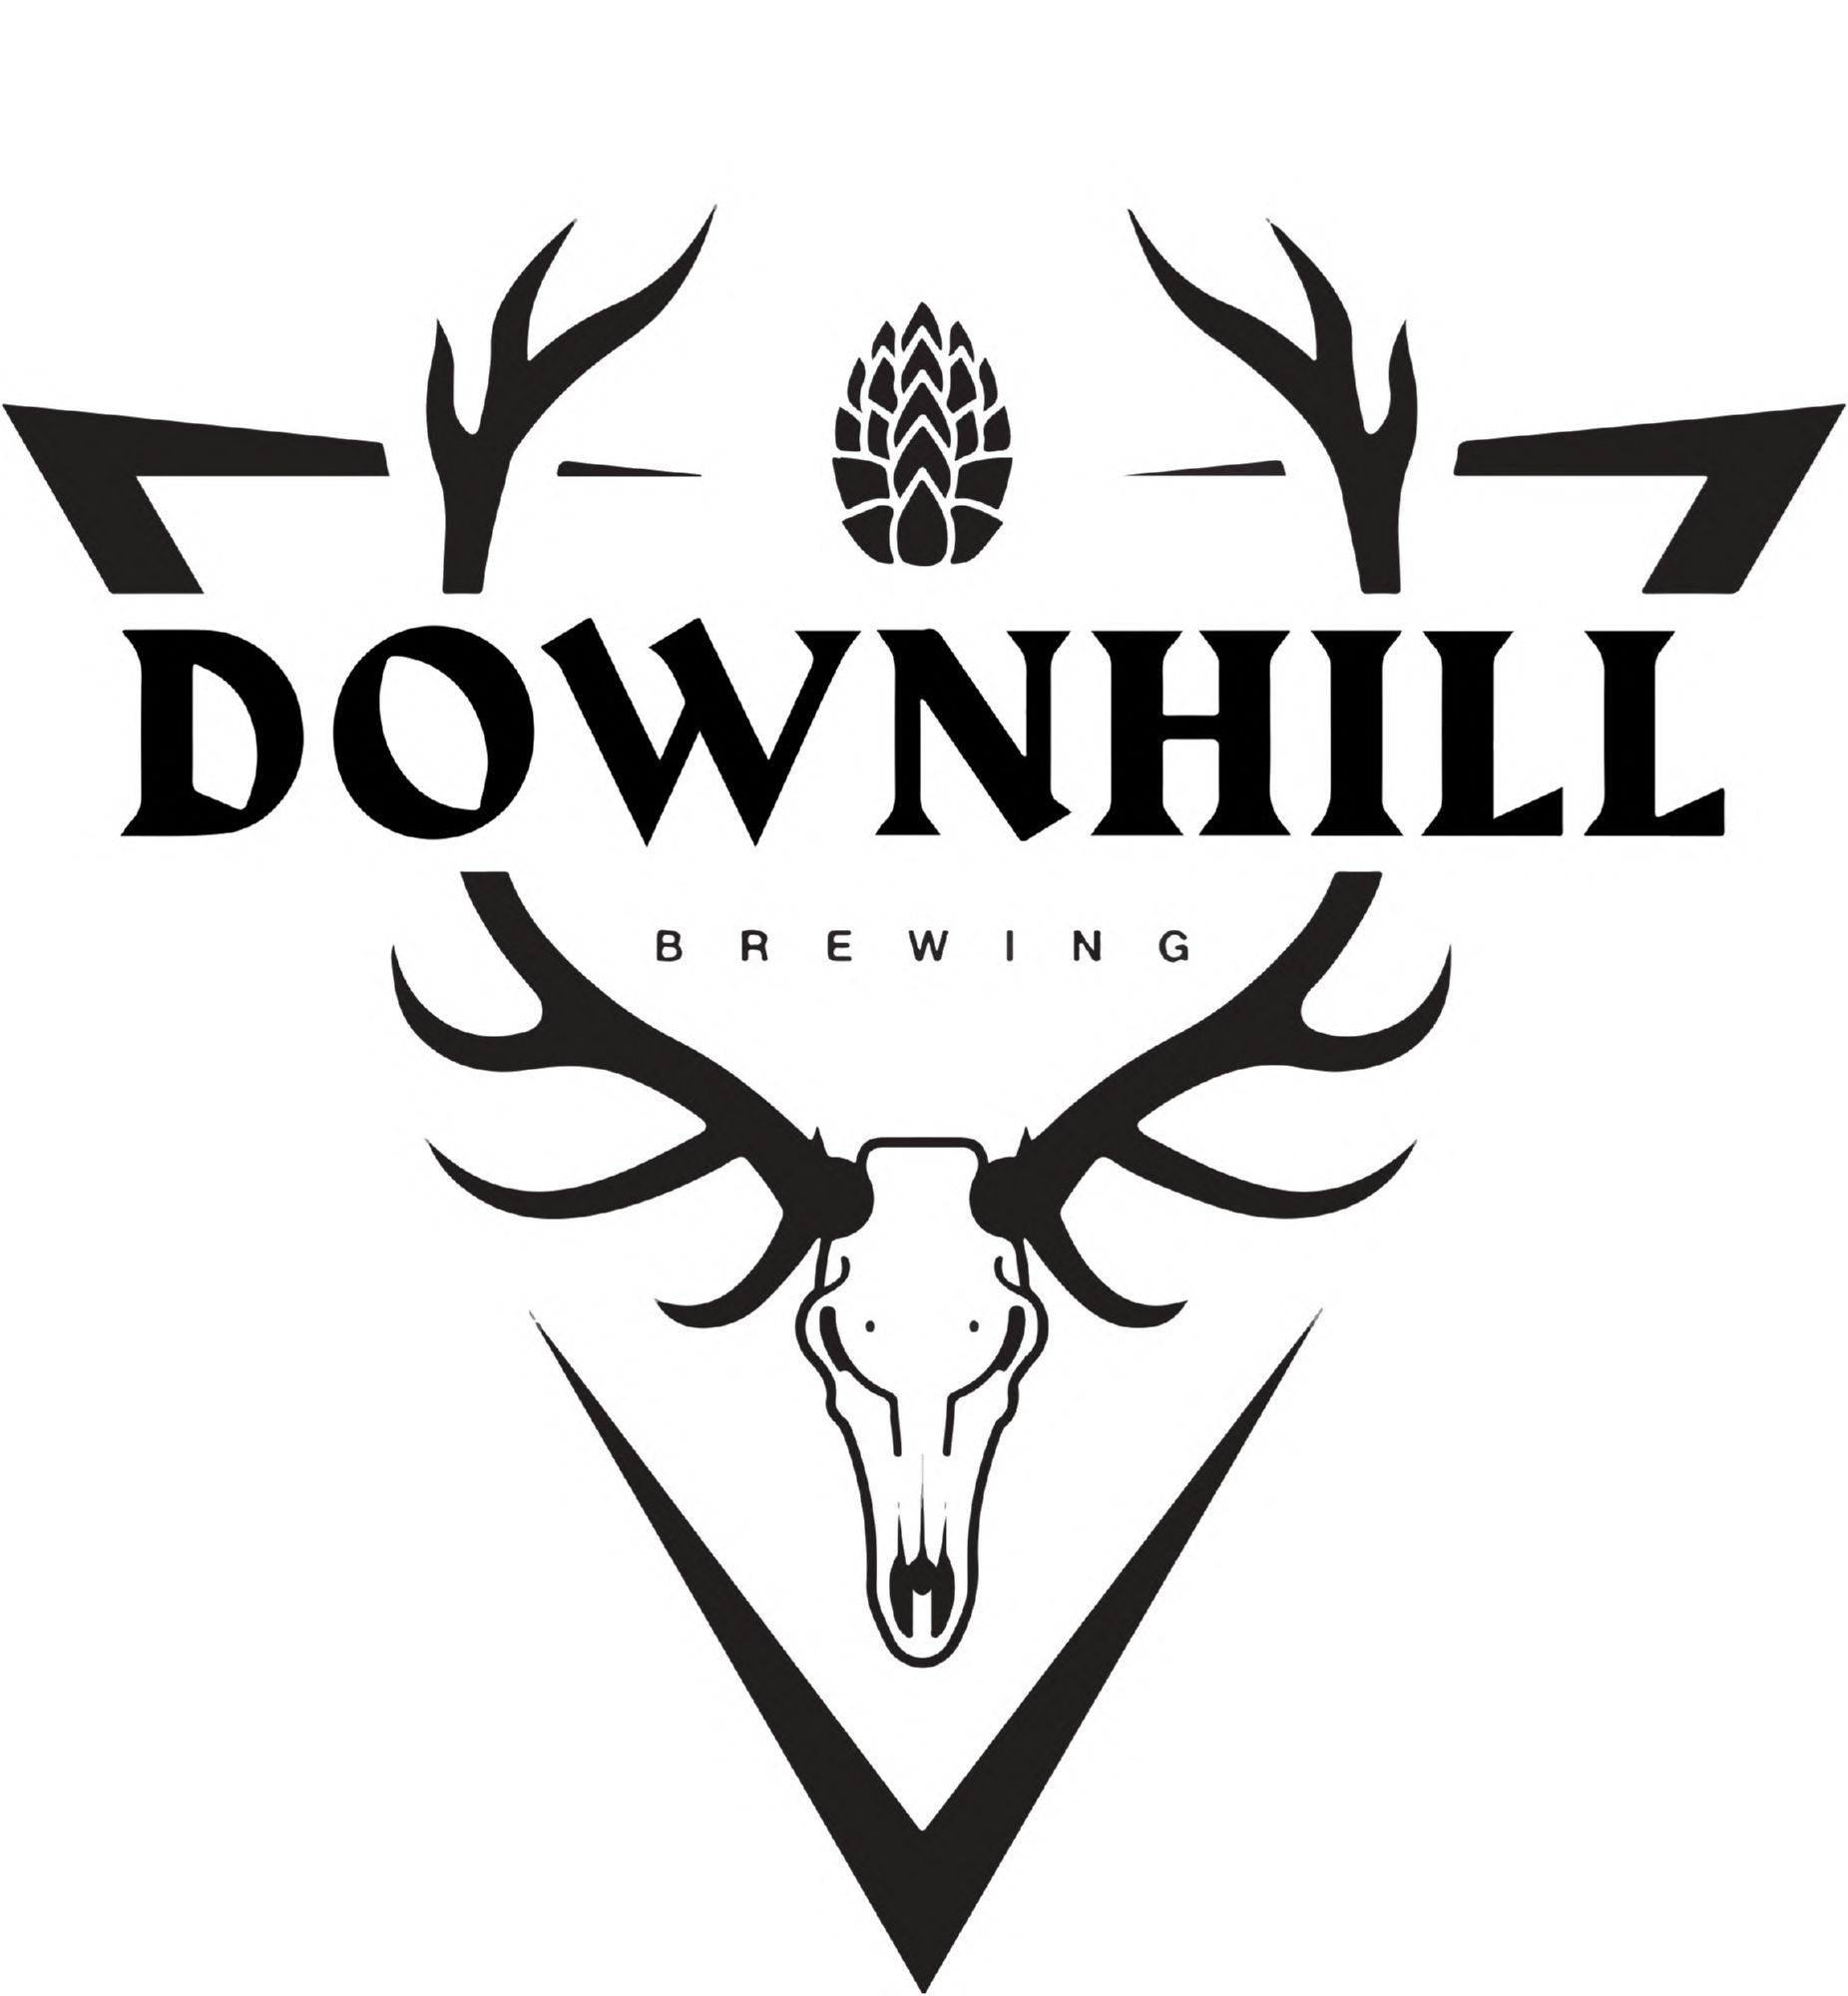 Downhill Brewing